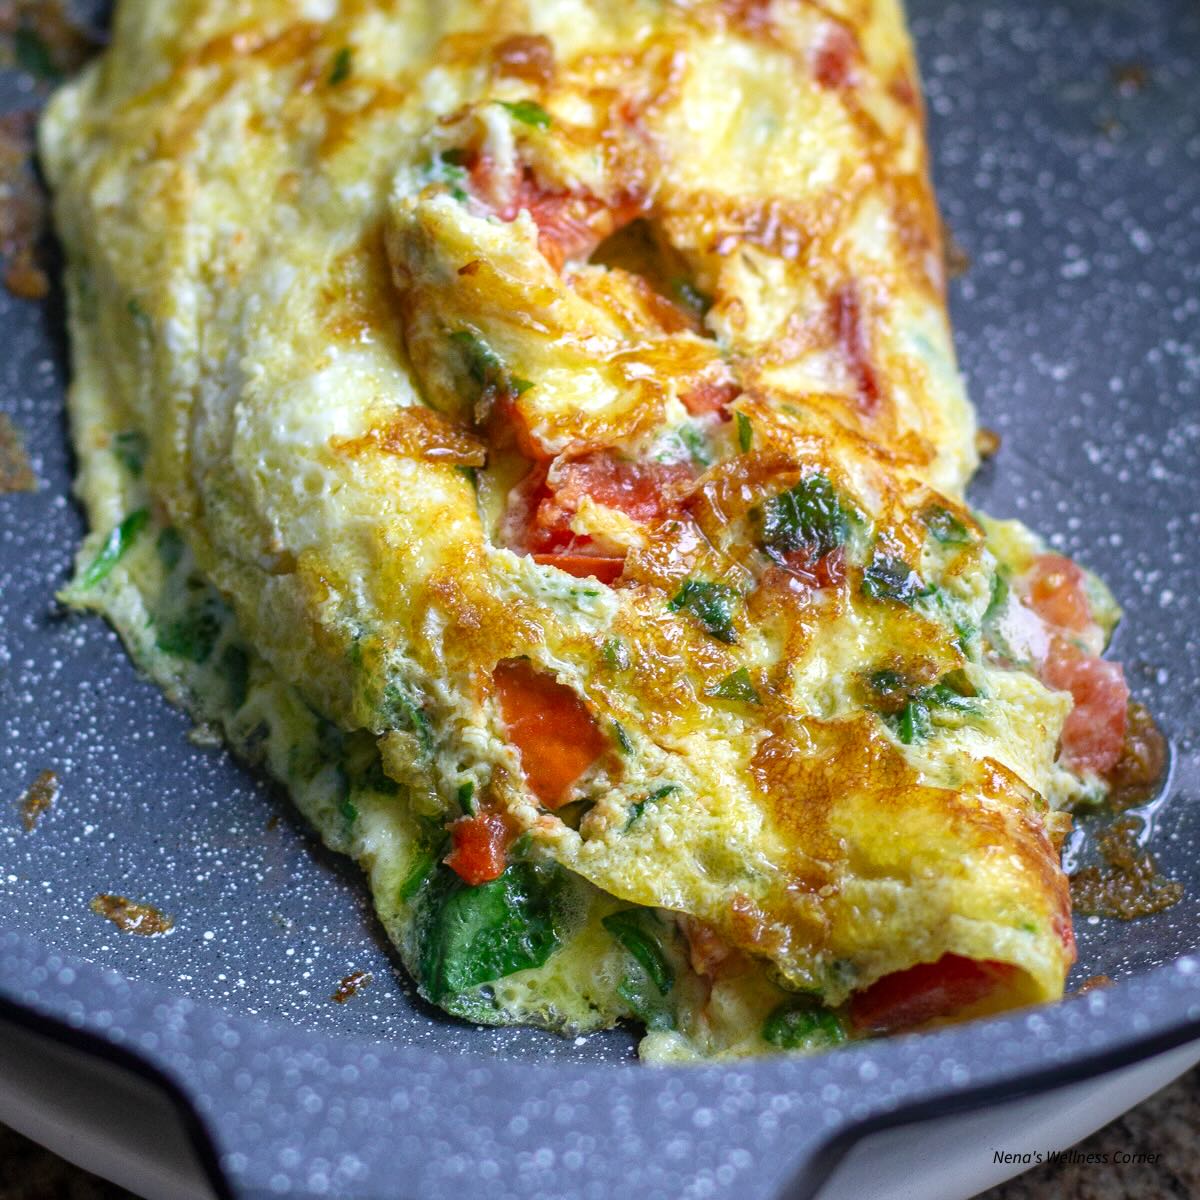 Avocado omelette with spinach and tomato 